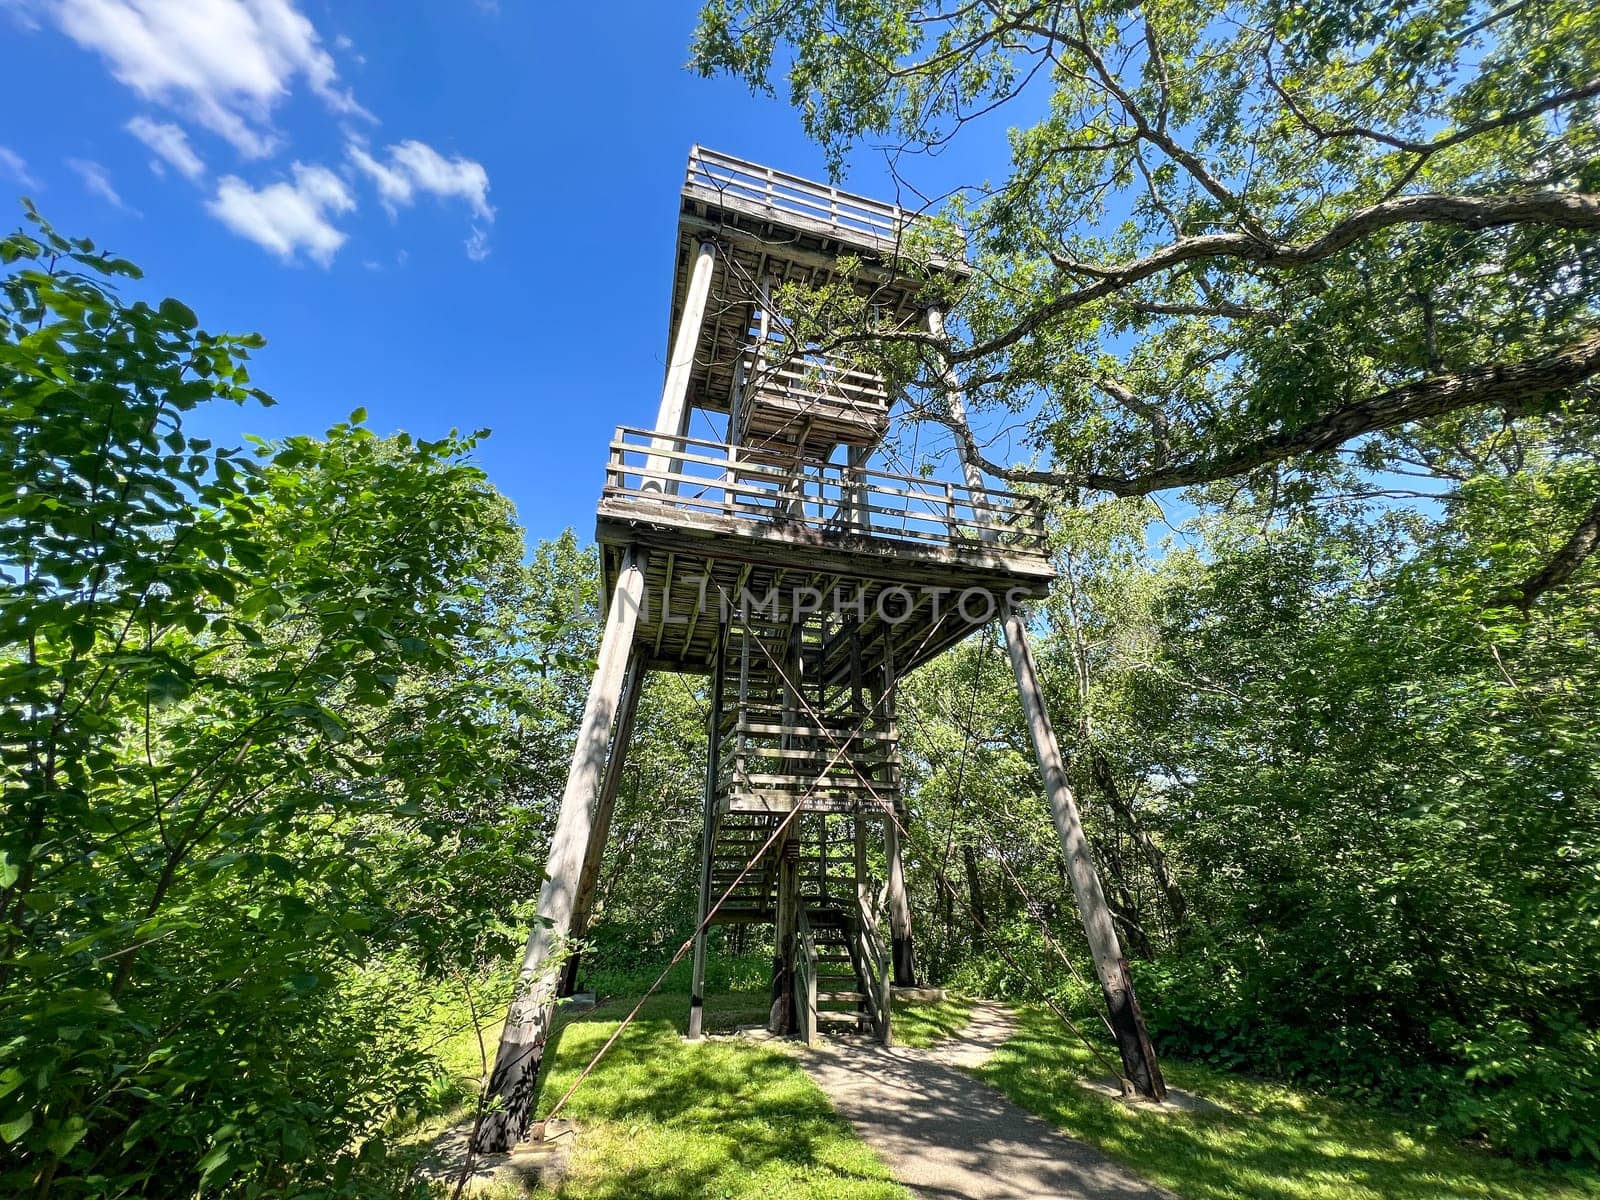 Blue mounts state park viewing tower in the middle of the forest . High quality photo